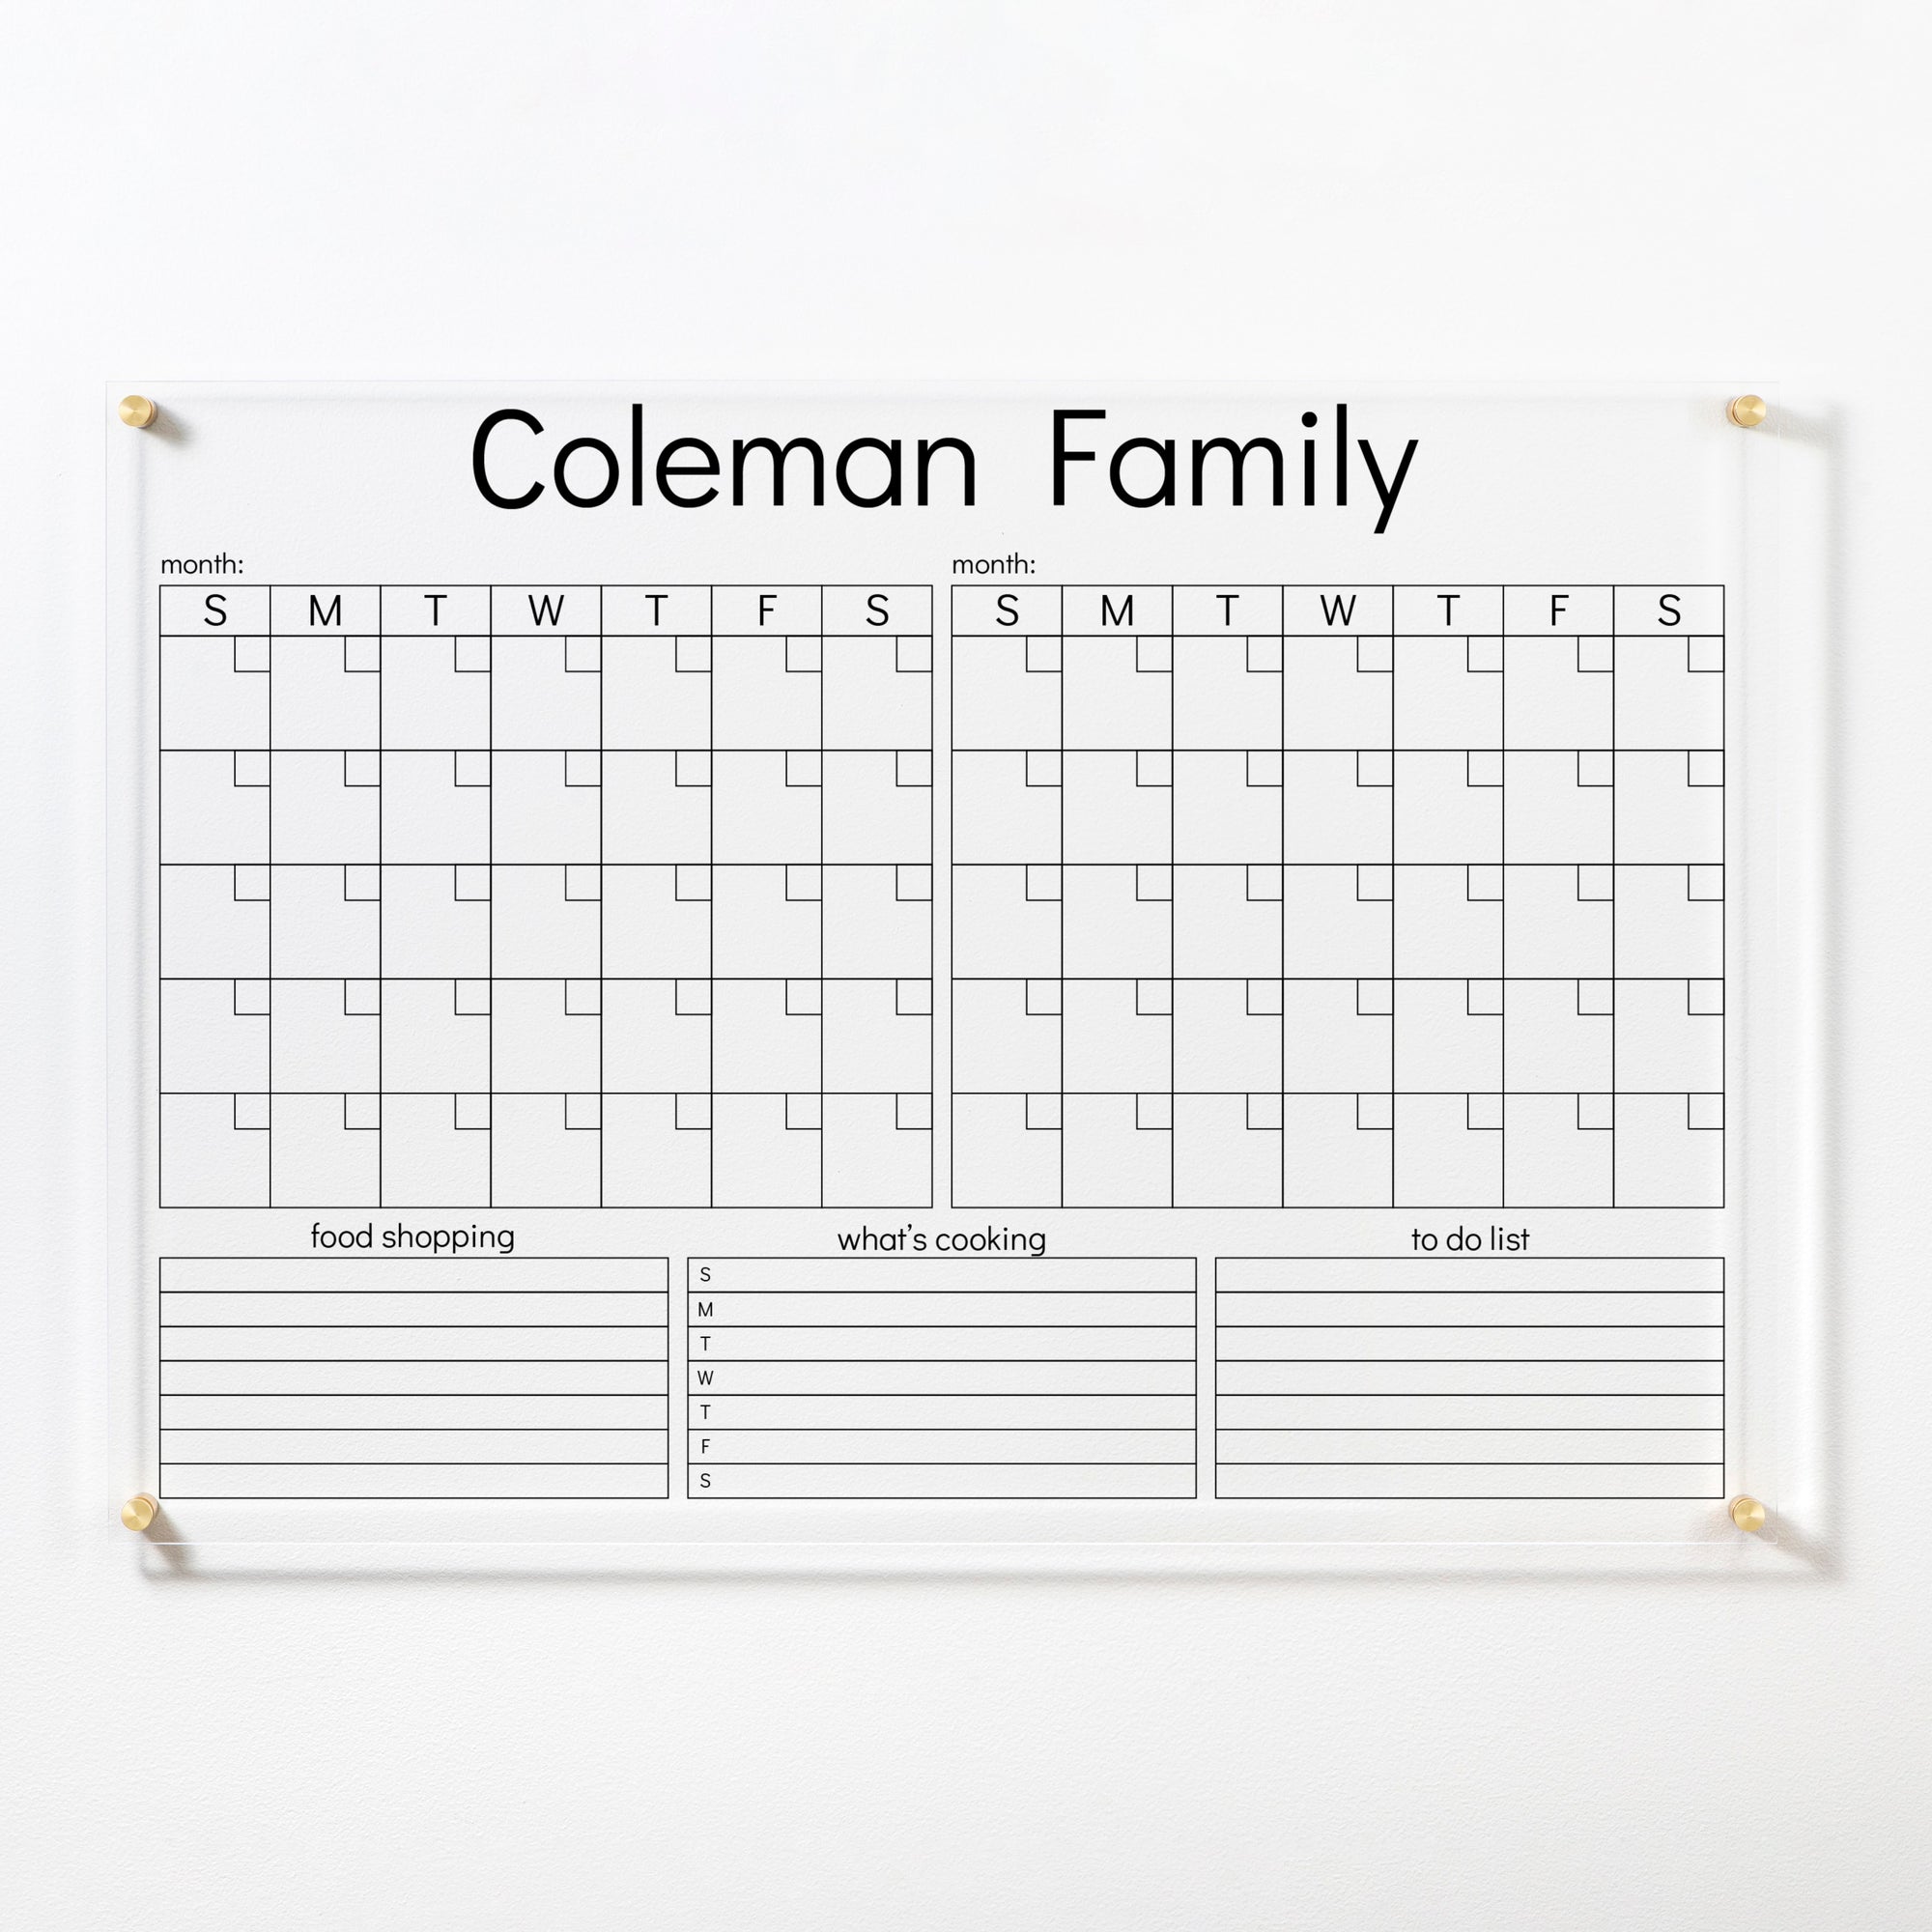 Personalized 2 Month Acrylic Calendar | 605